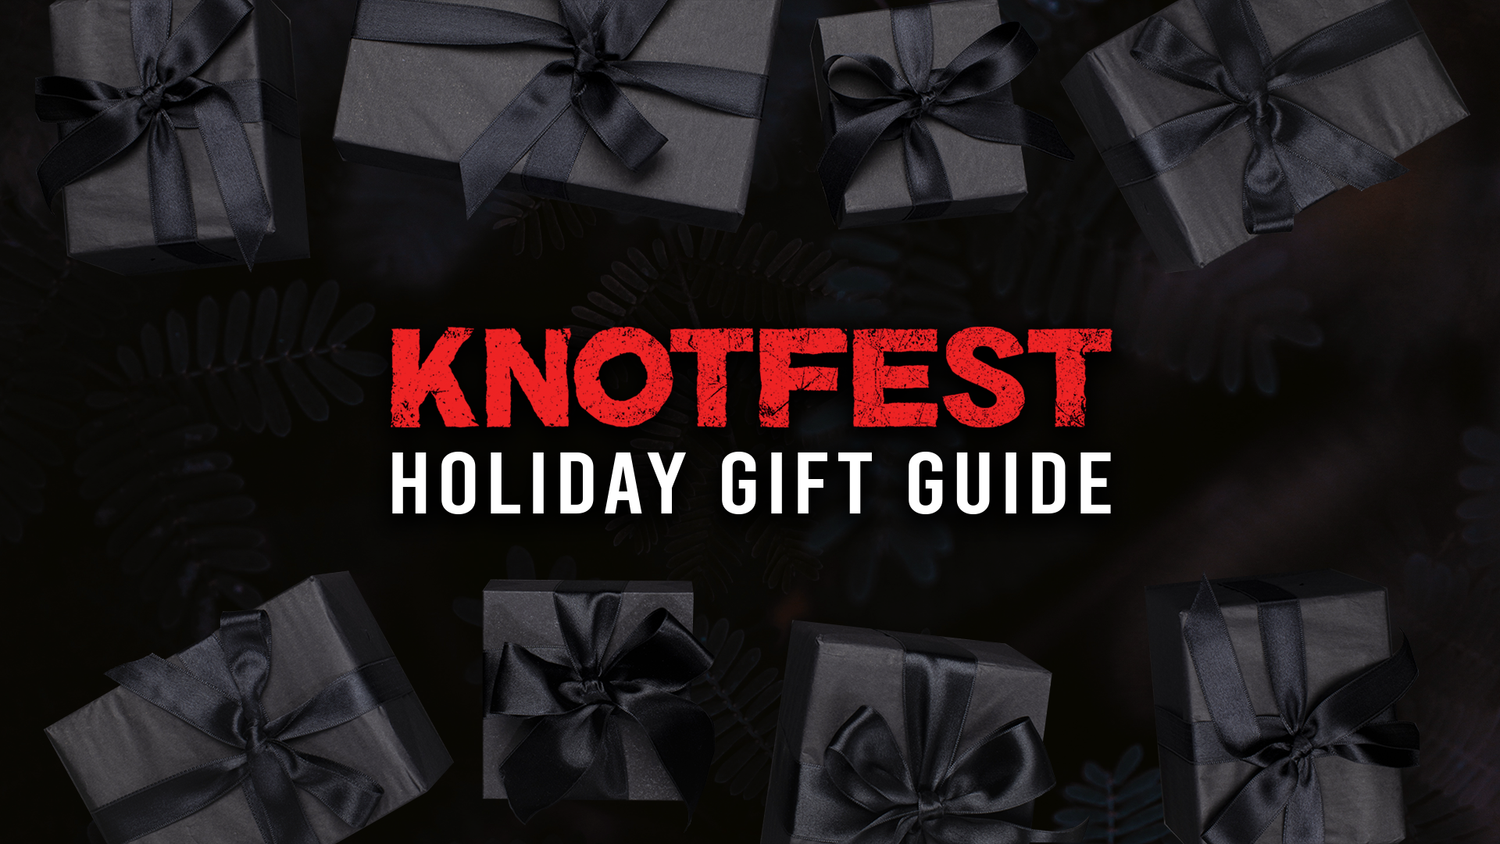 The 2022 Knotfest Holiday Gift Guide